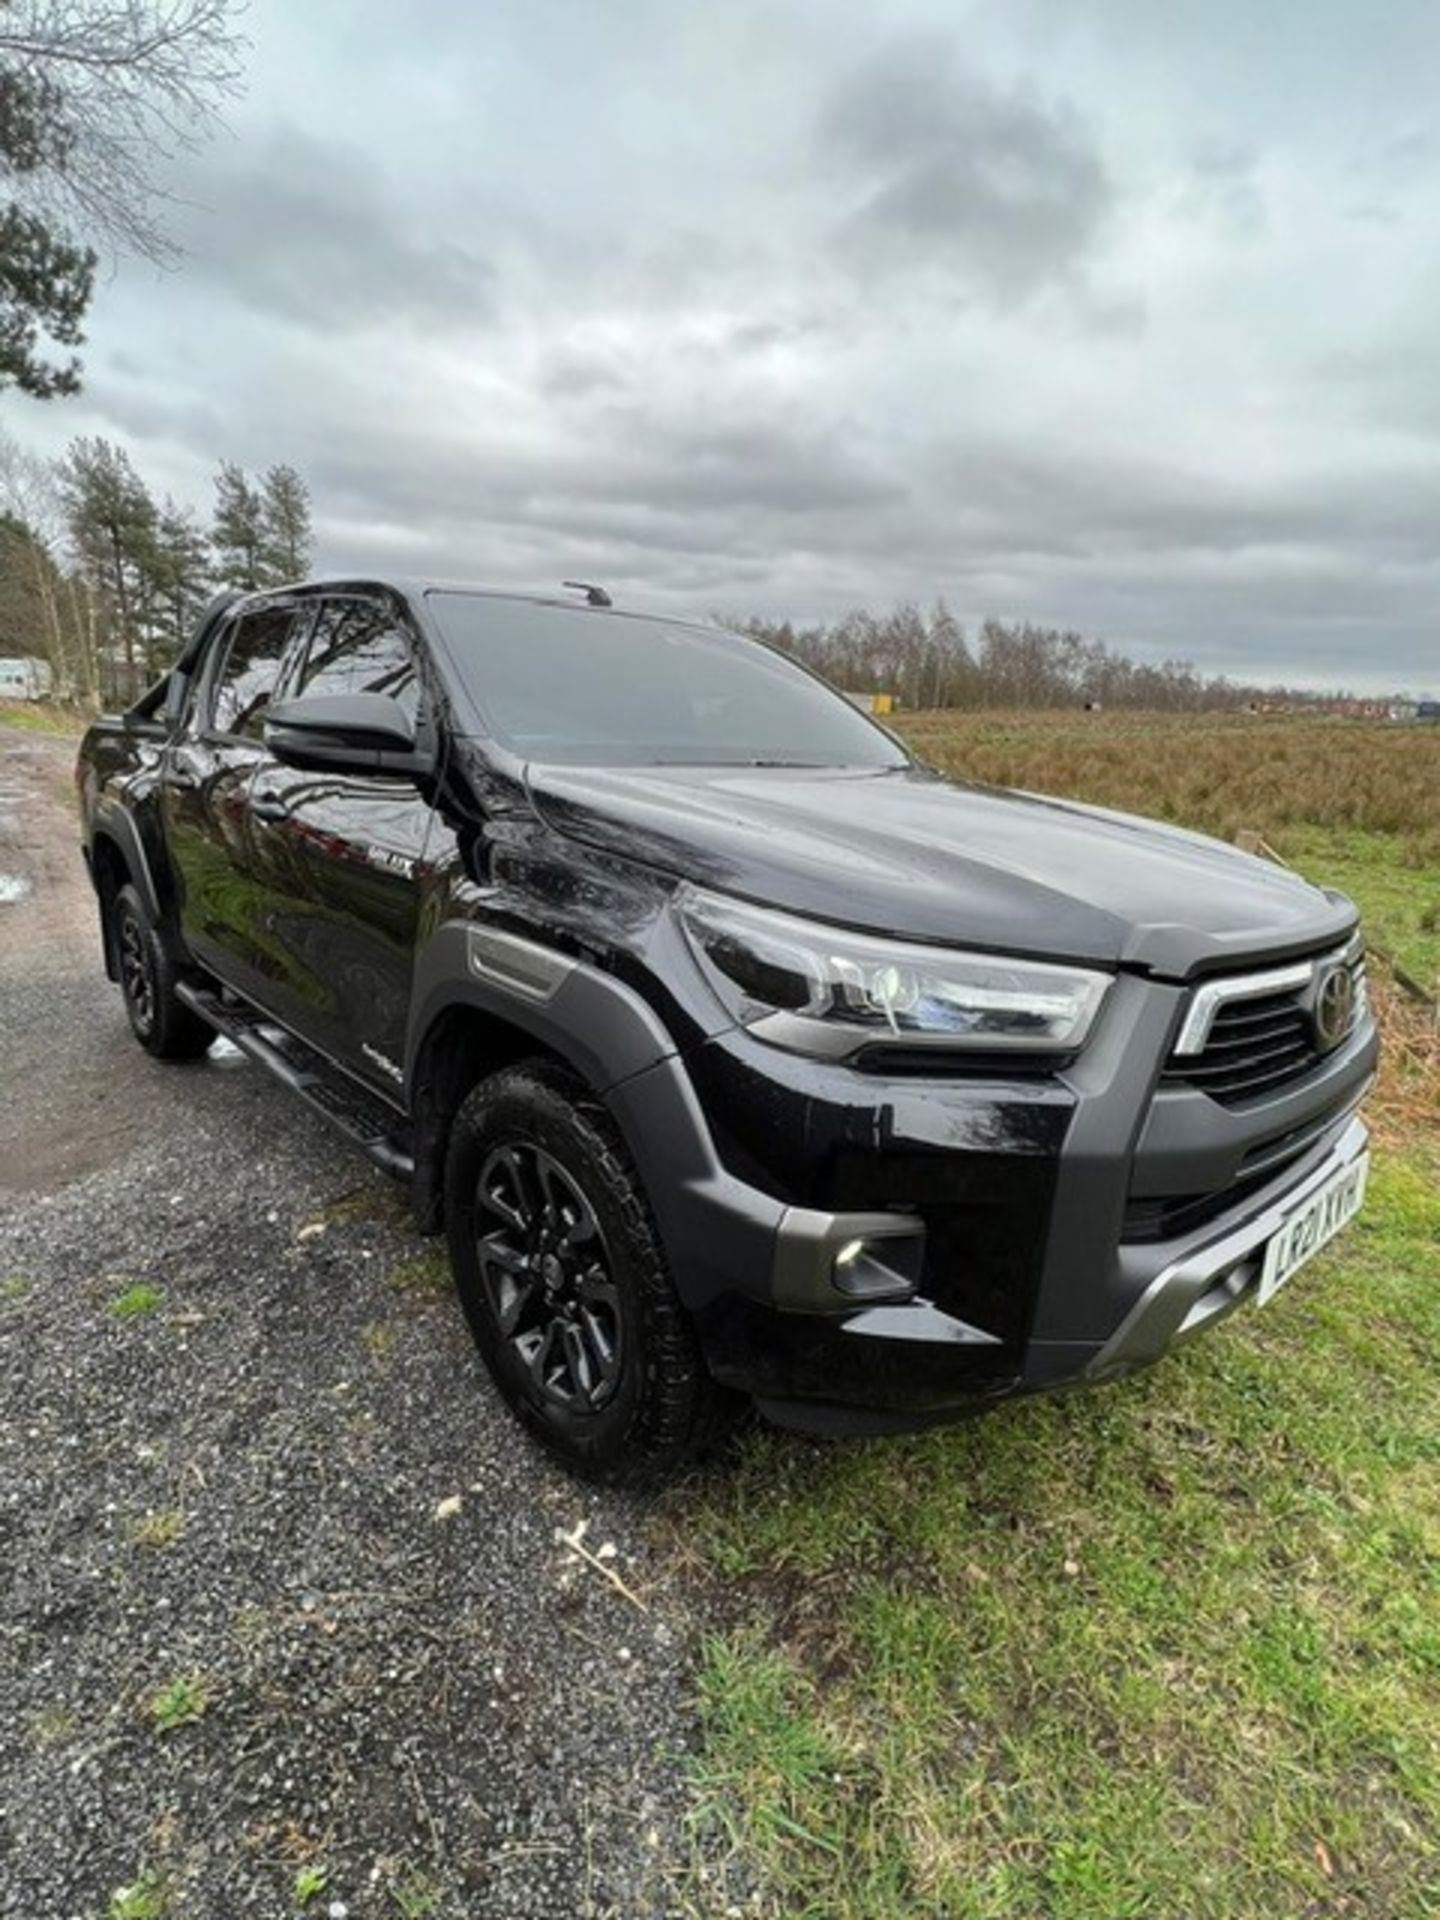 TOYOTA HILUX INVINCIBLE - Image 7 of 13